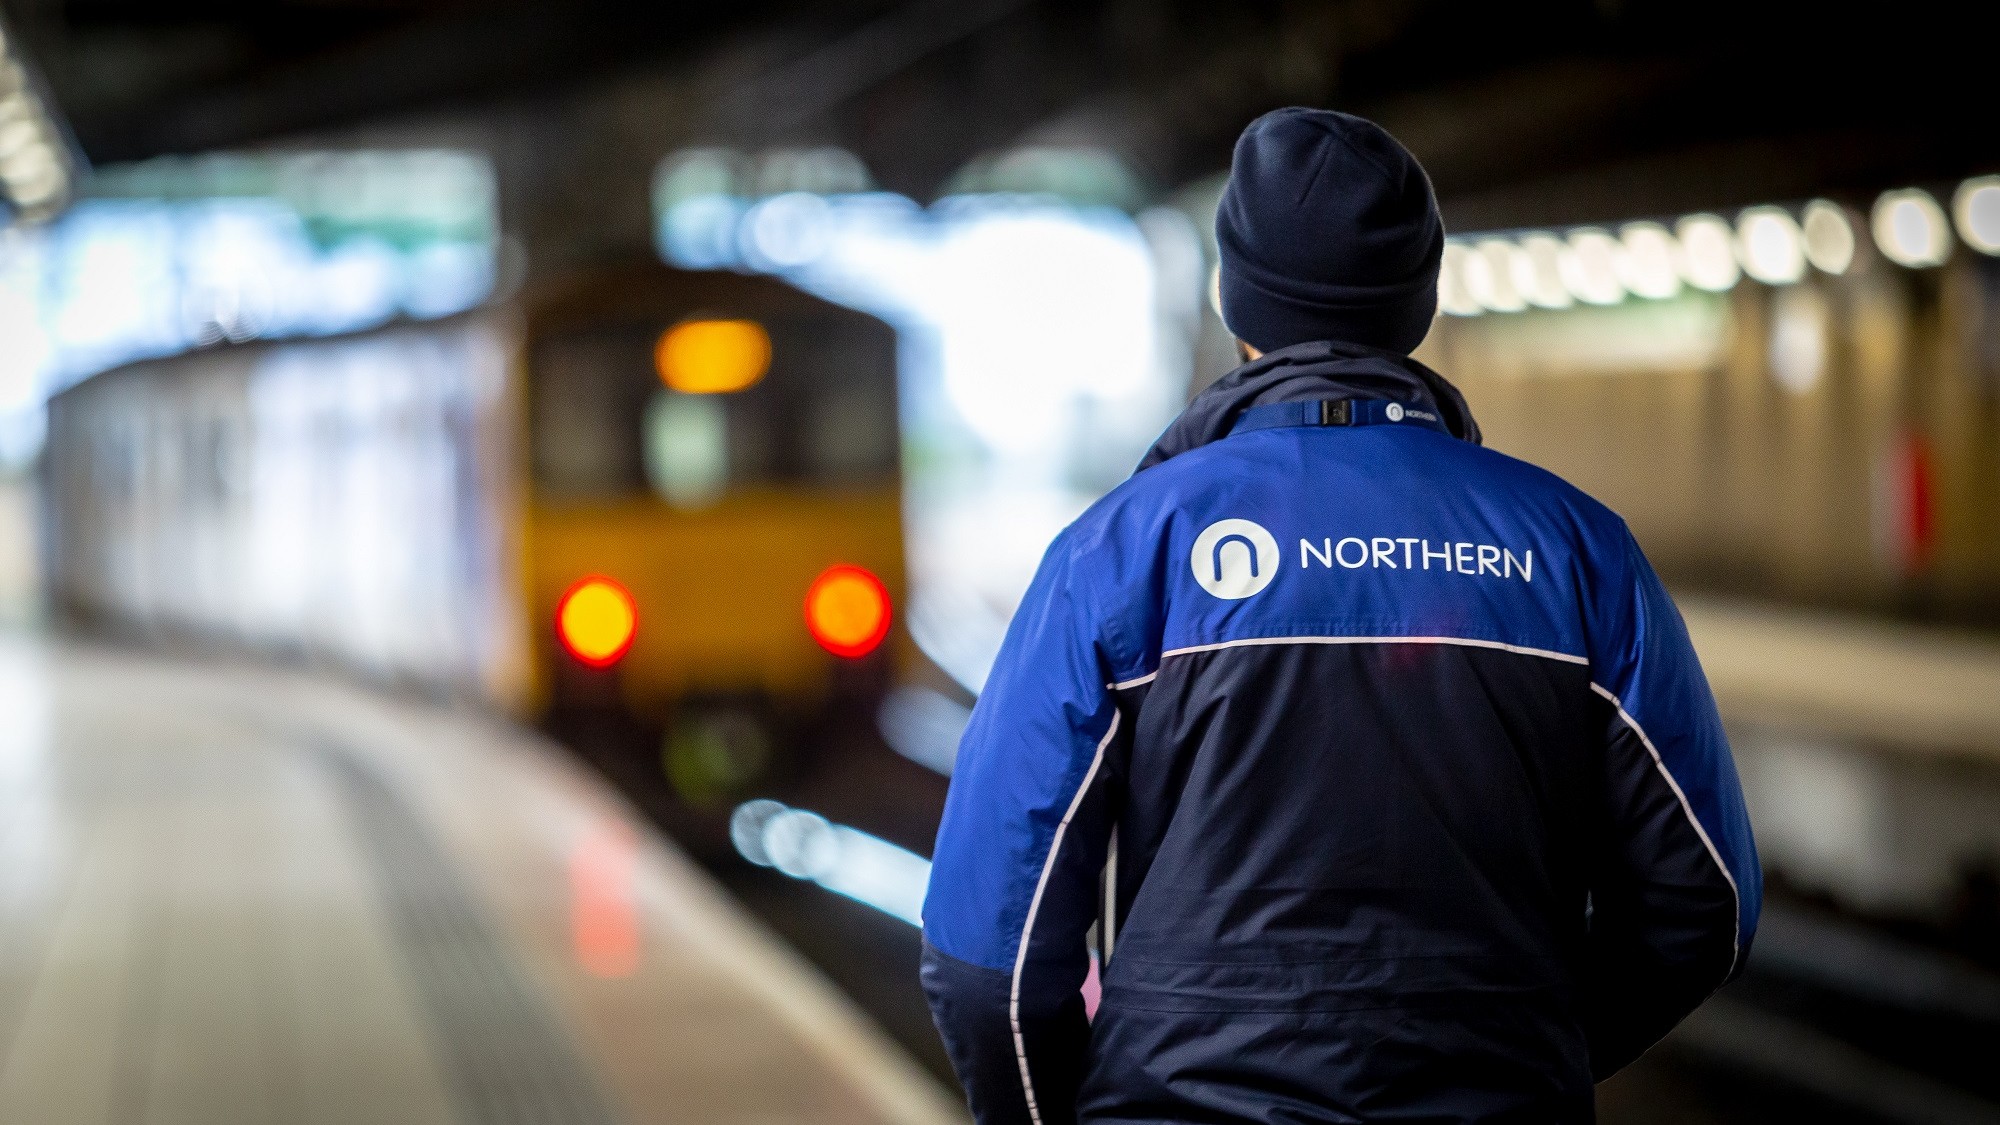 Image shows Northern service arriving into station